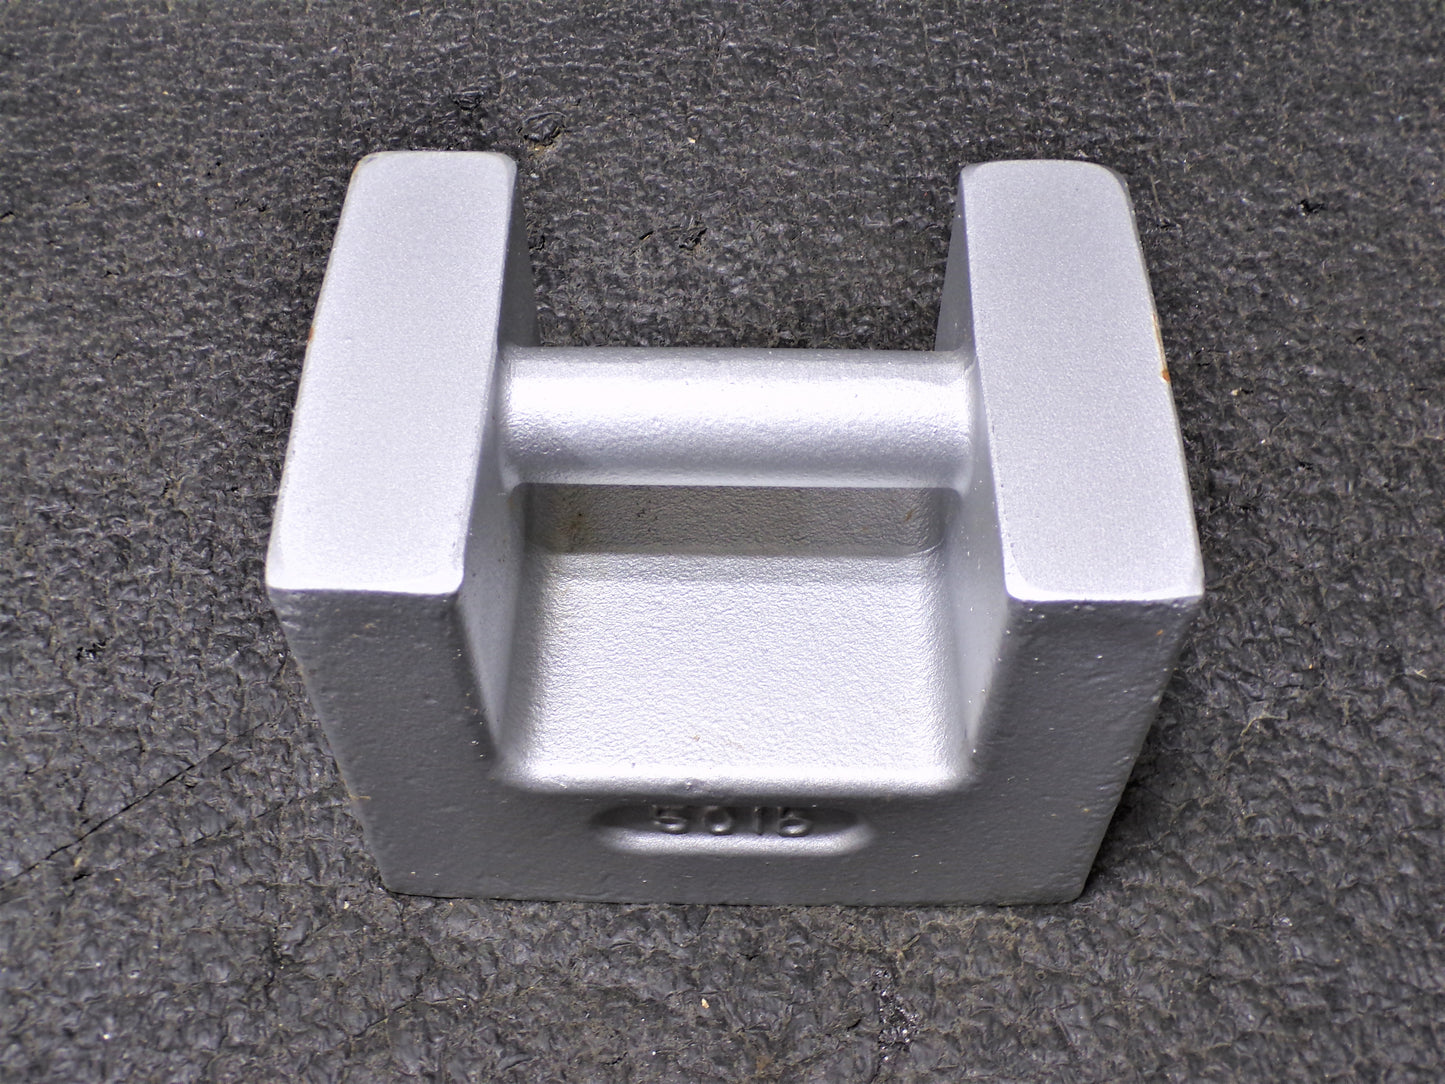 RICE LAKE WEIGHING SYSTEMS 50 lb Calibration Weight, Grip Handle Style, Class 6, No Certificate, Cast Iron (CR00431-BT27)